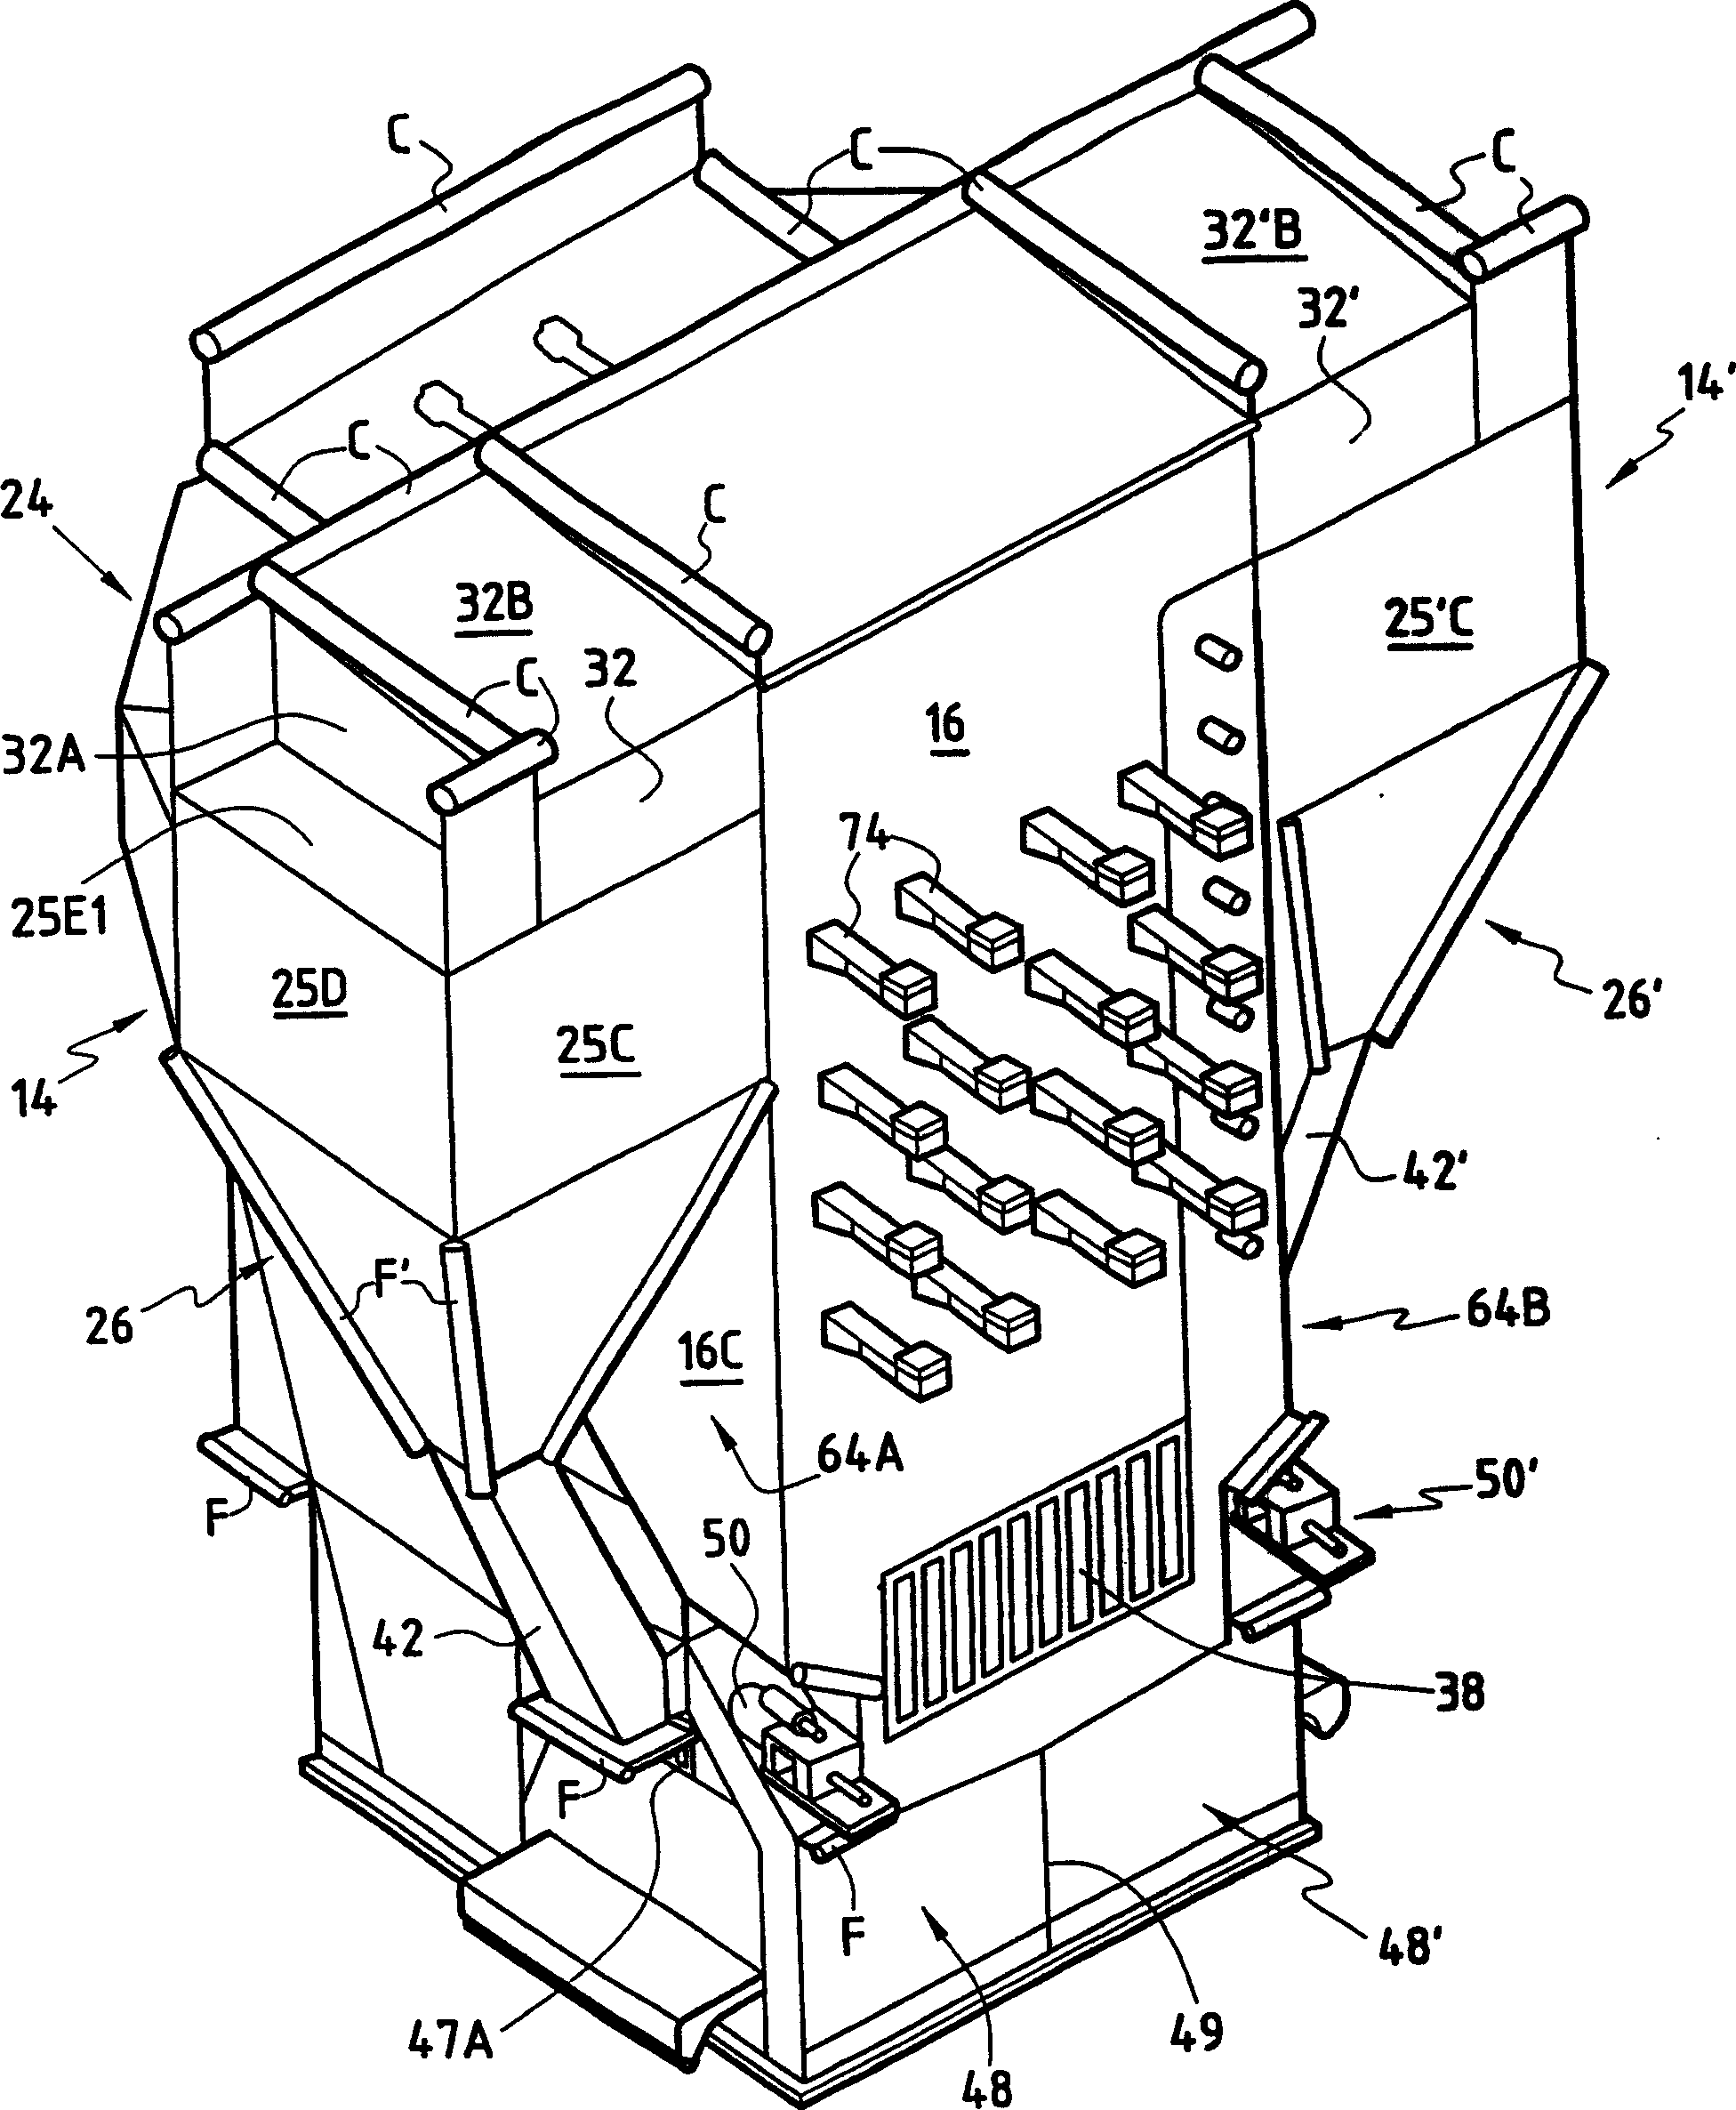 A circulating fluidized bed reactor device